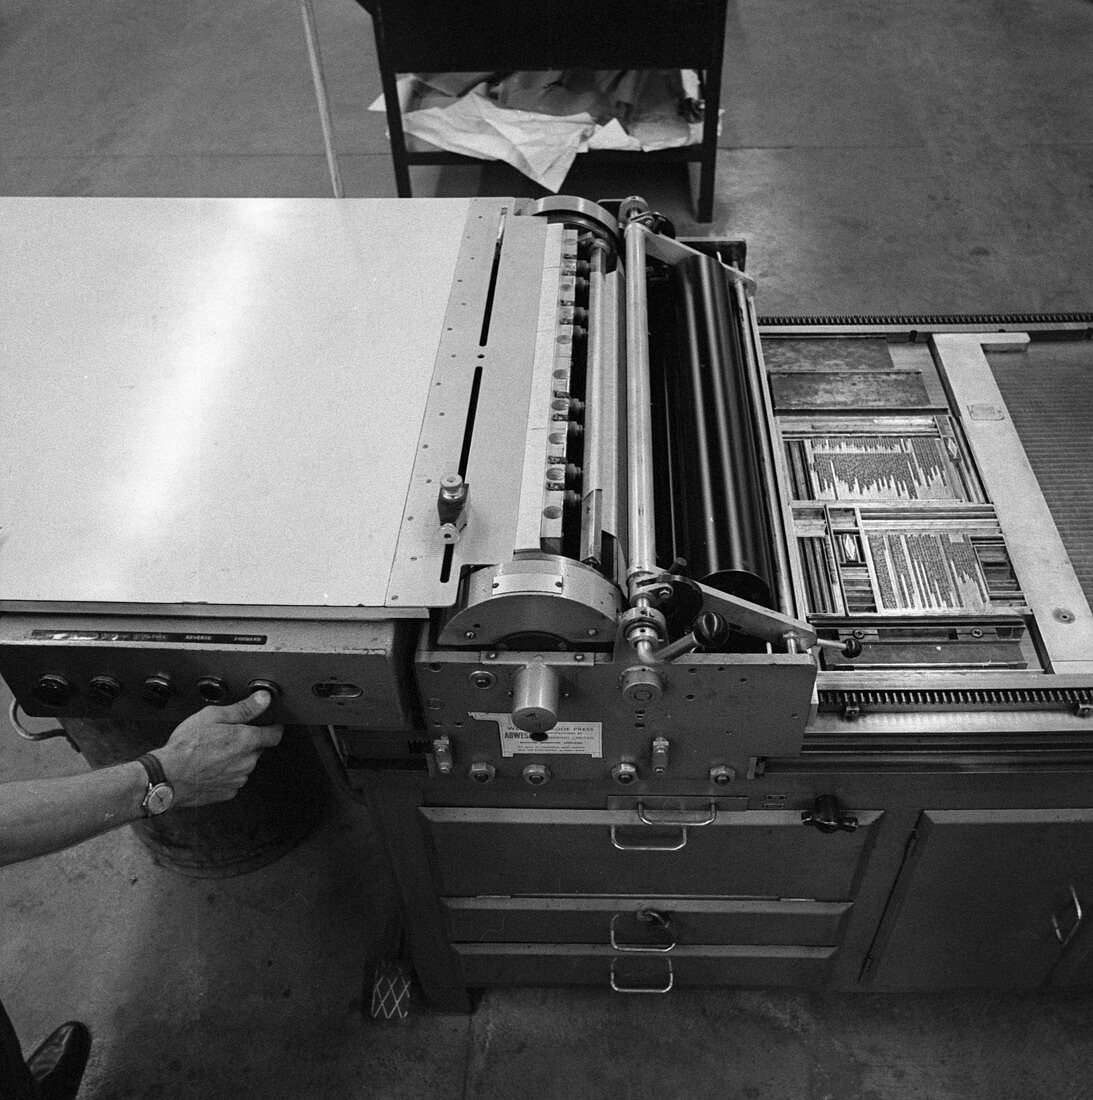 Proofing press with plates, 1968